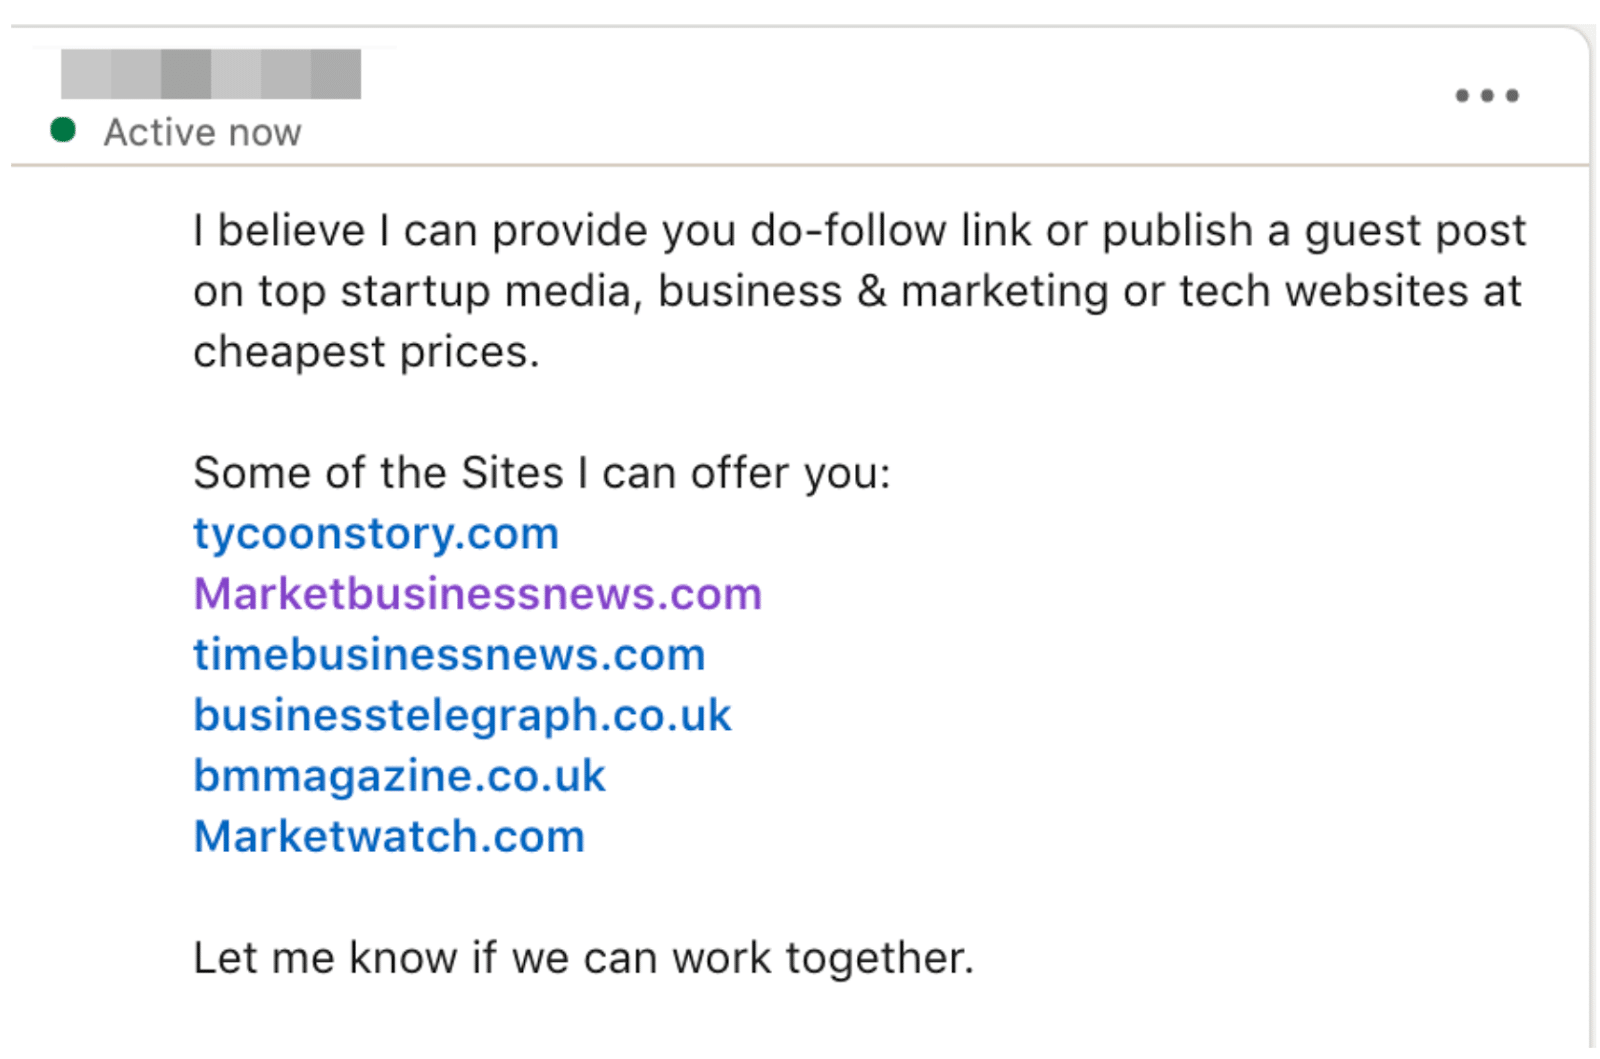 Example of email outreach for external links and guest posting for SaaS that shouldn't be accepted